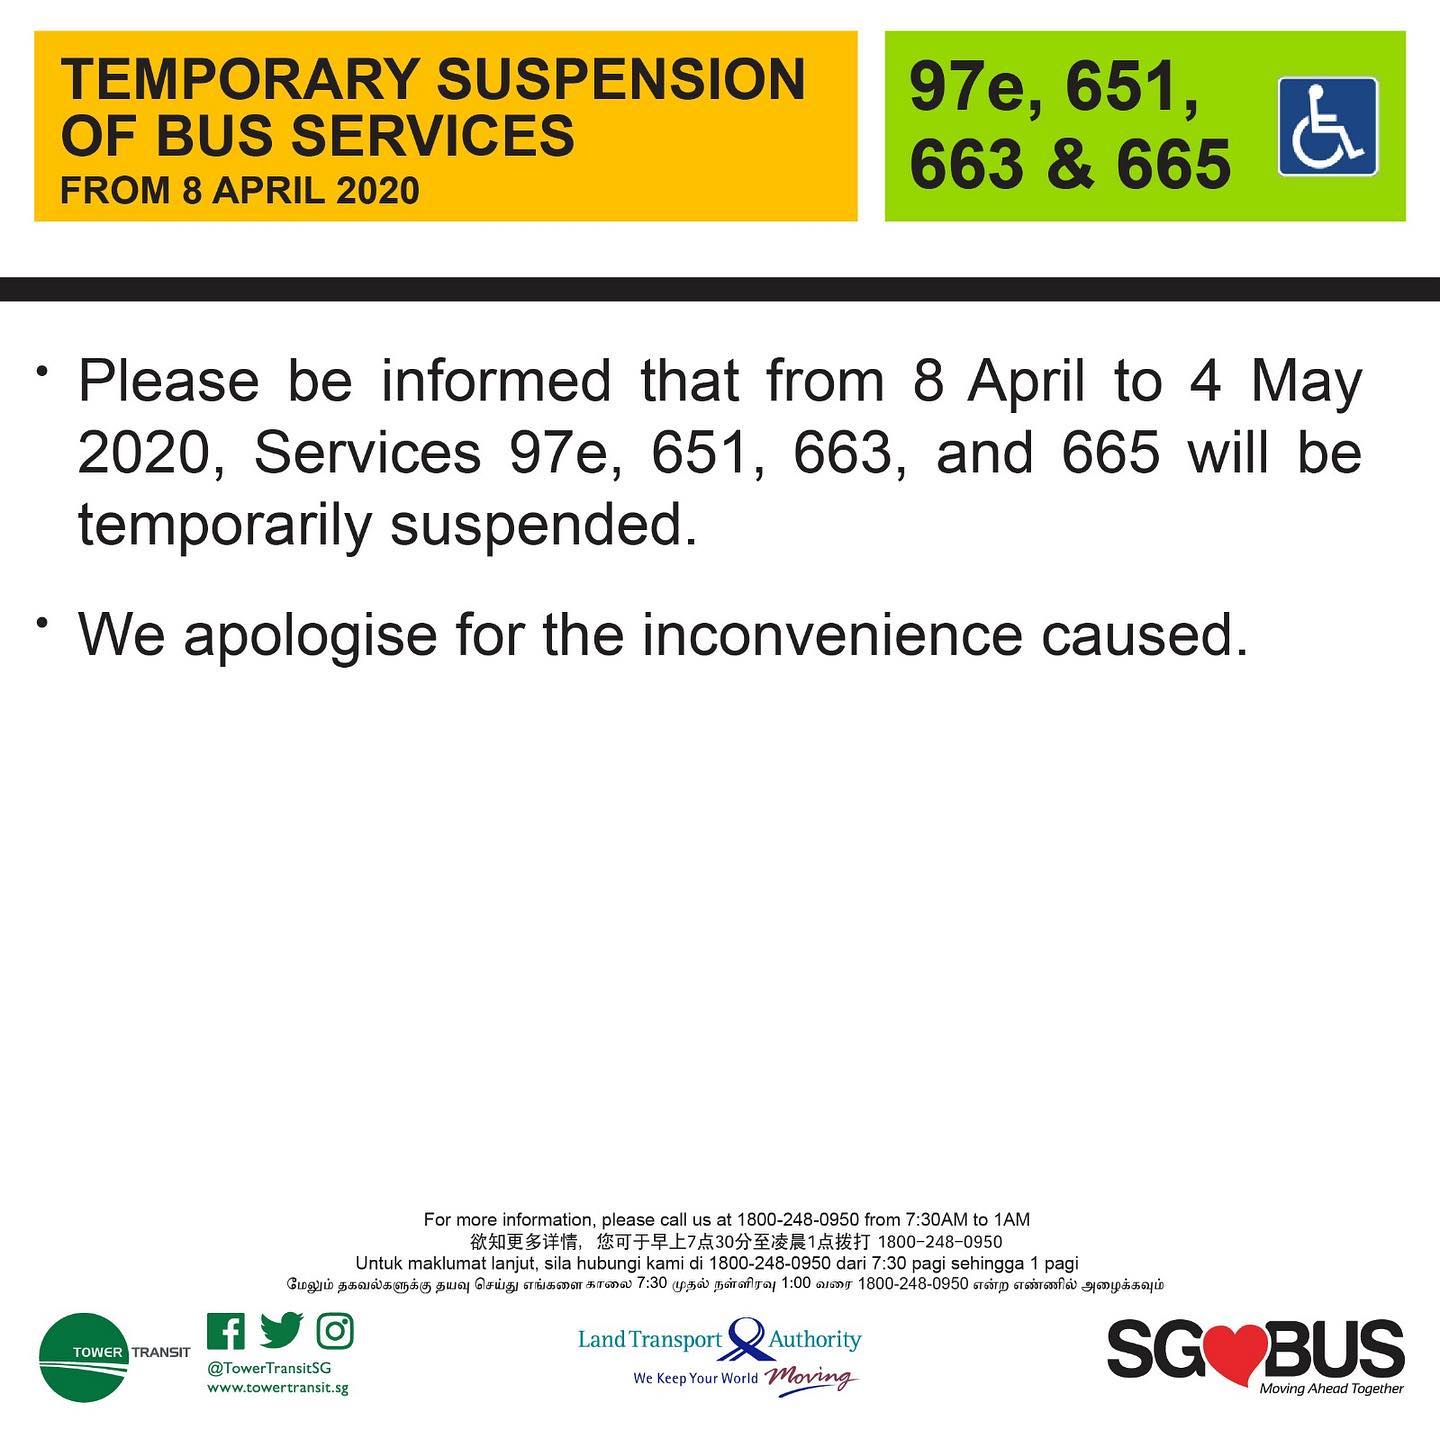 Official announcement from Tower Transit Singapore on temporary bus service suspension during COVID-19 Circuit Breaker measures.